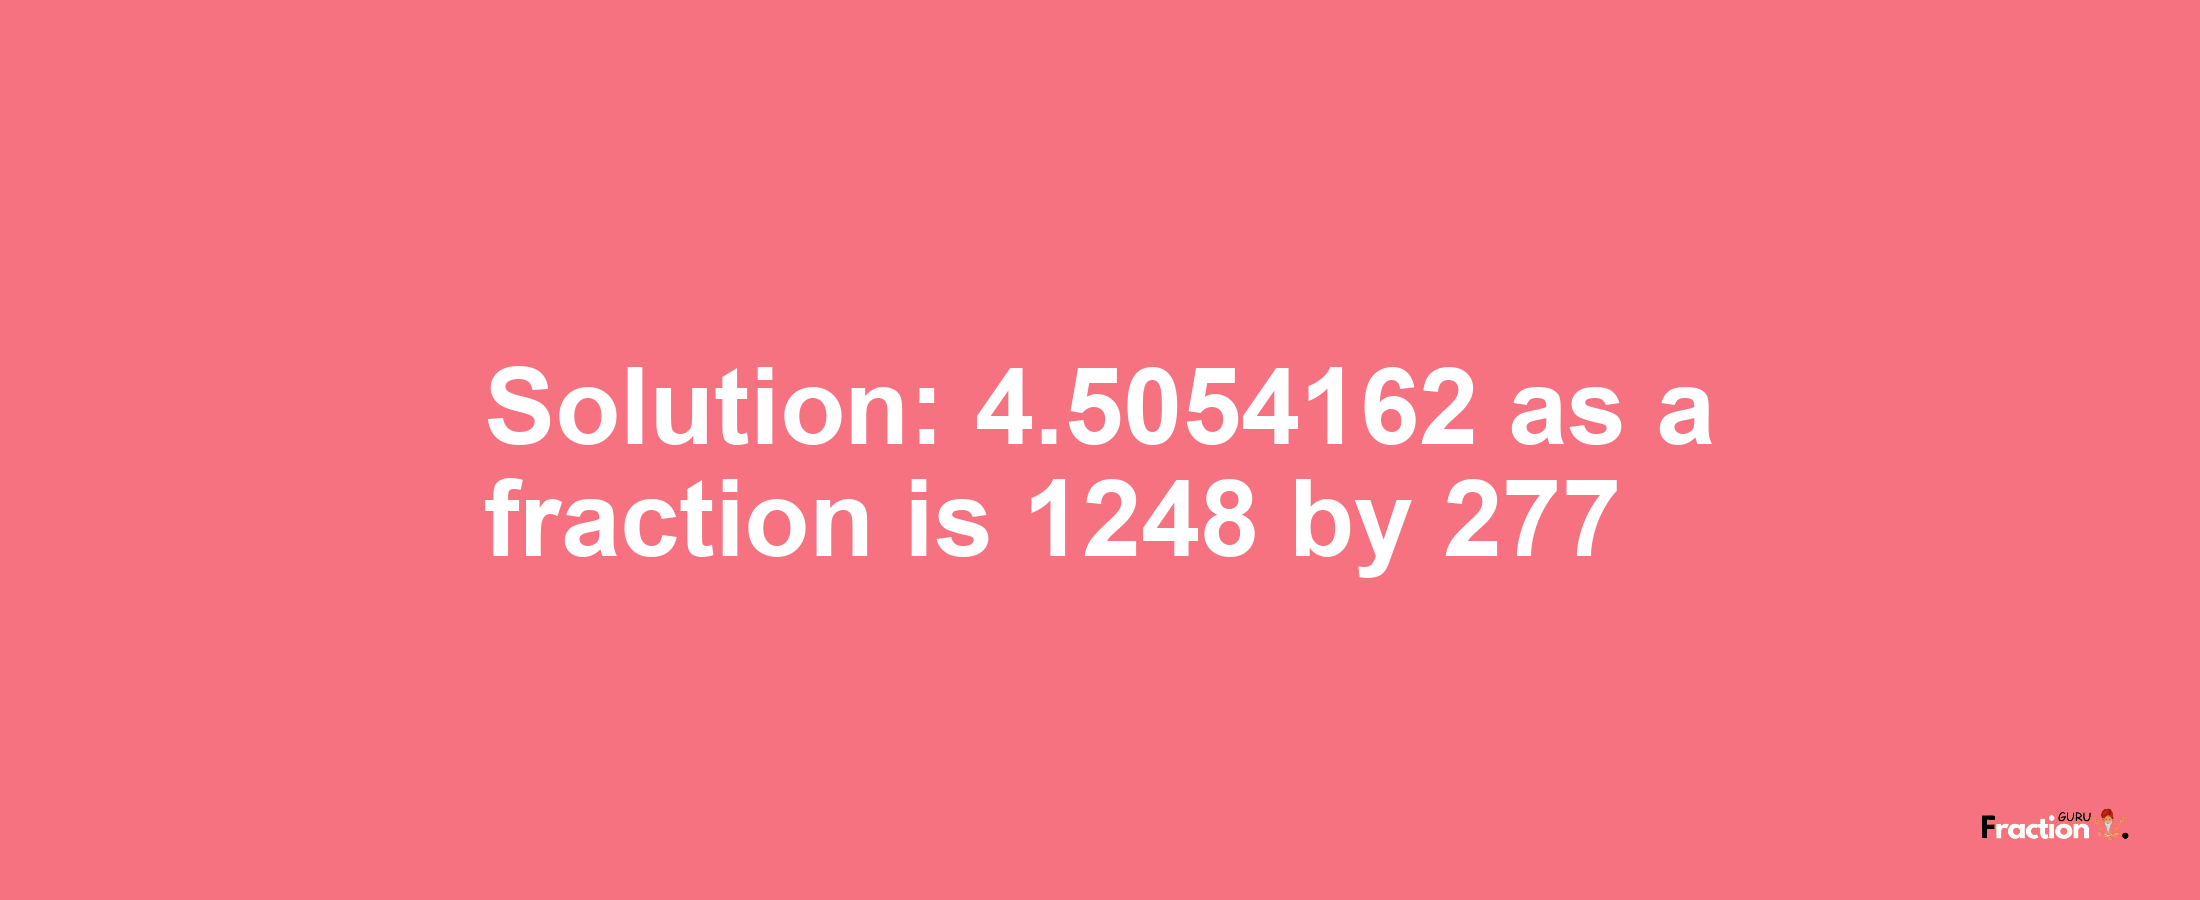 Solution:4.5054162 as a fraction is 1248/277